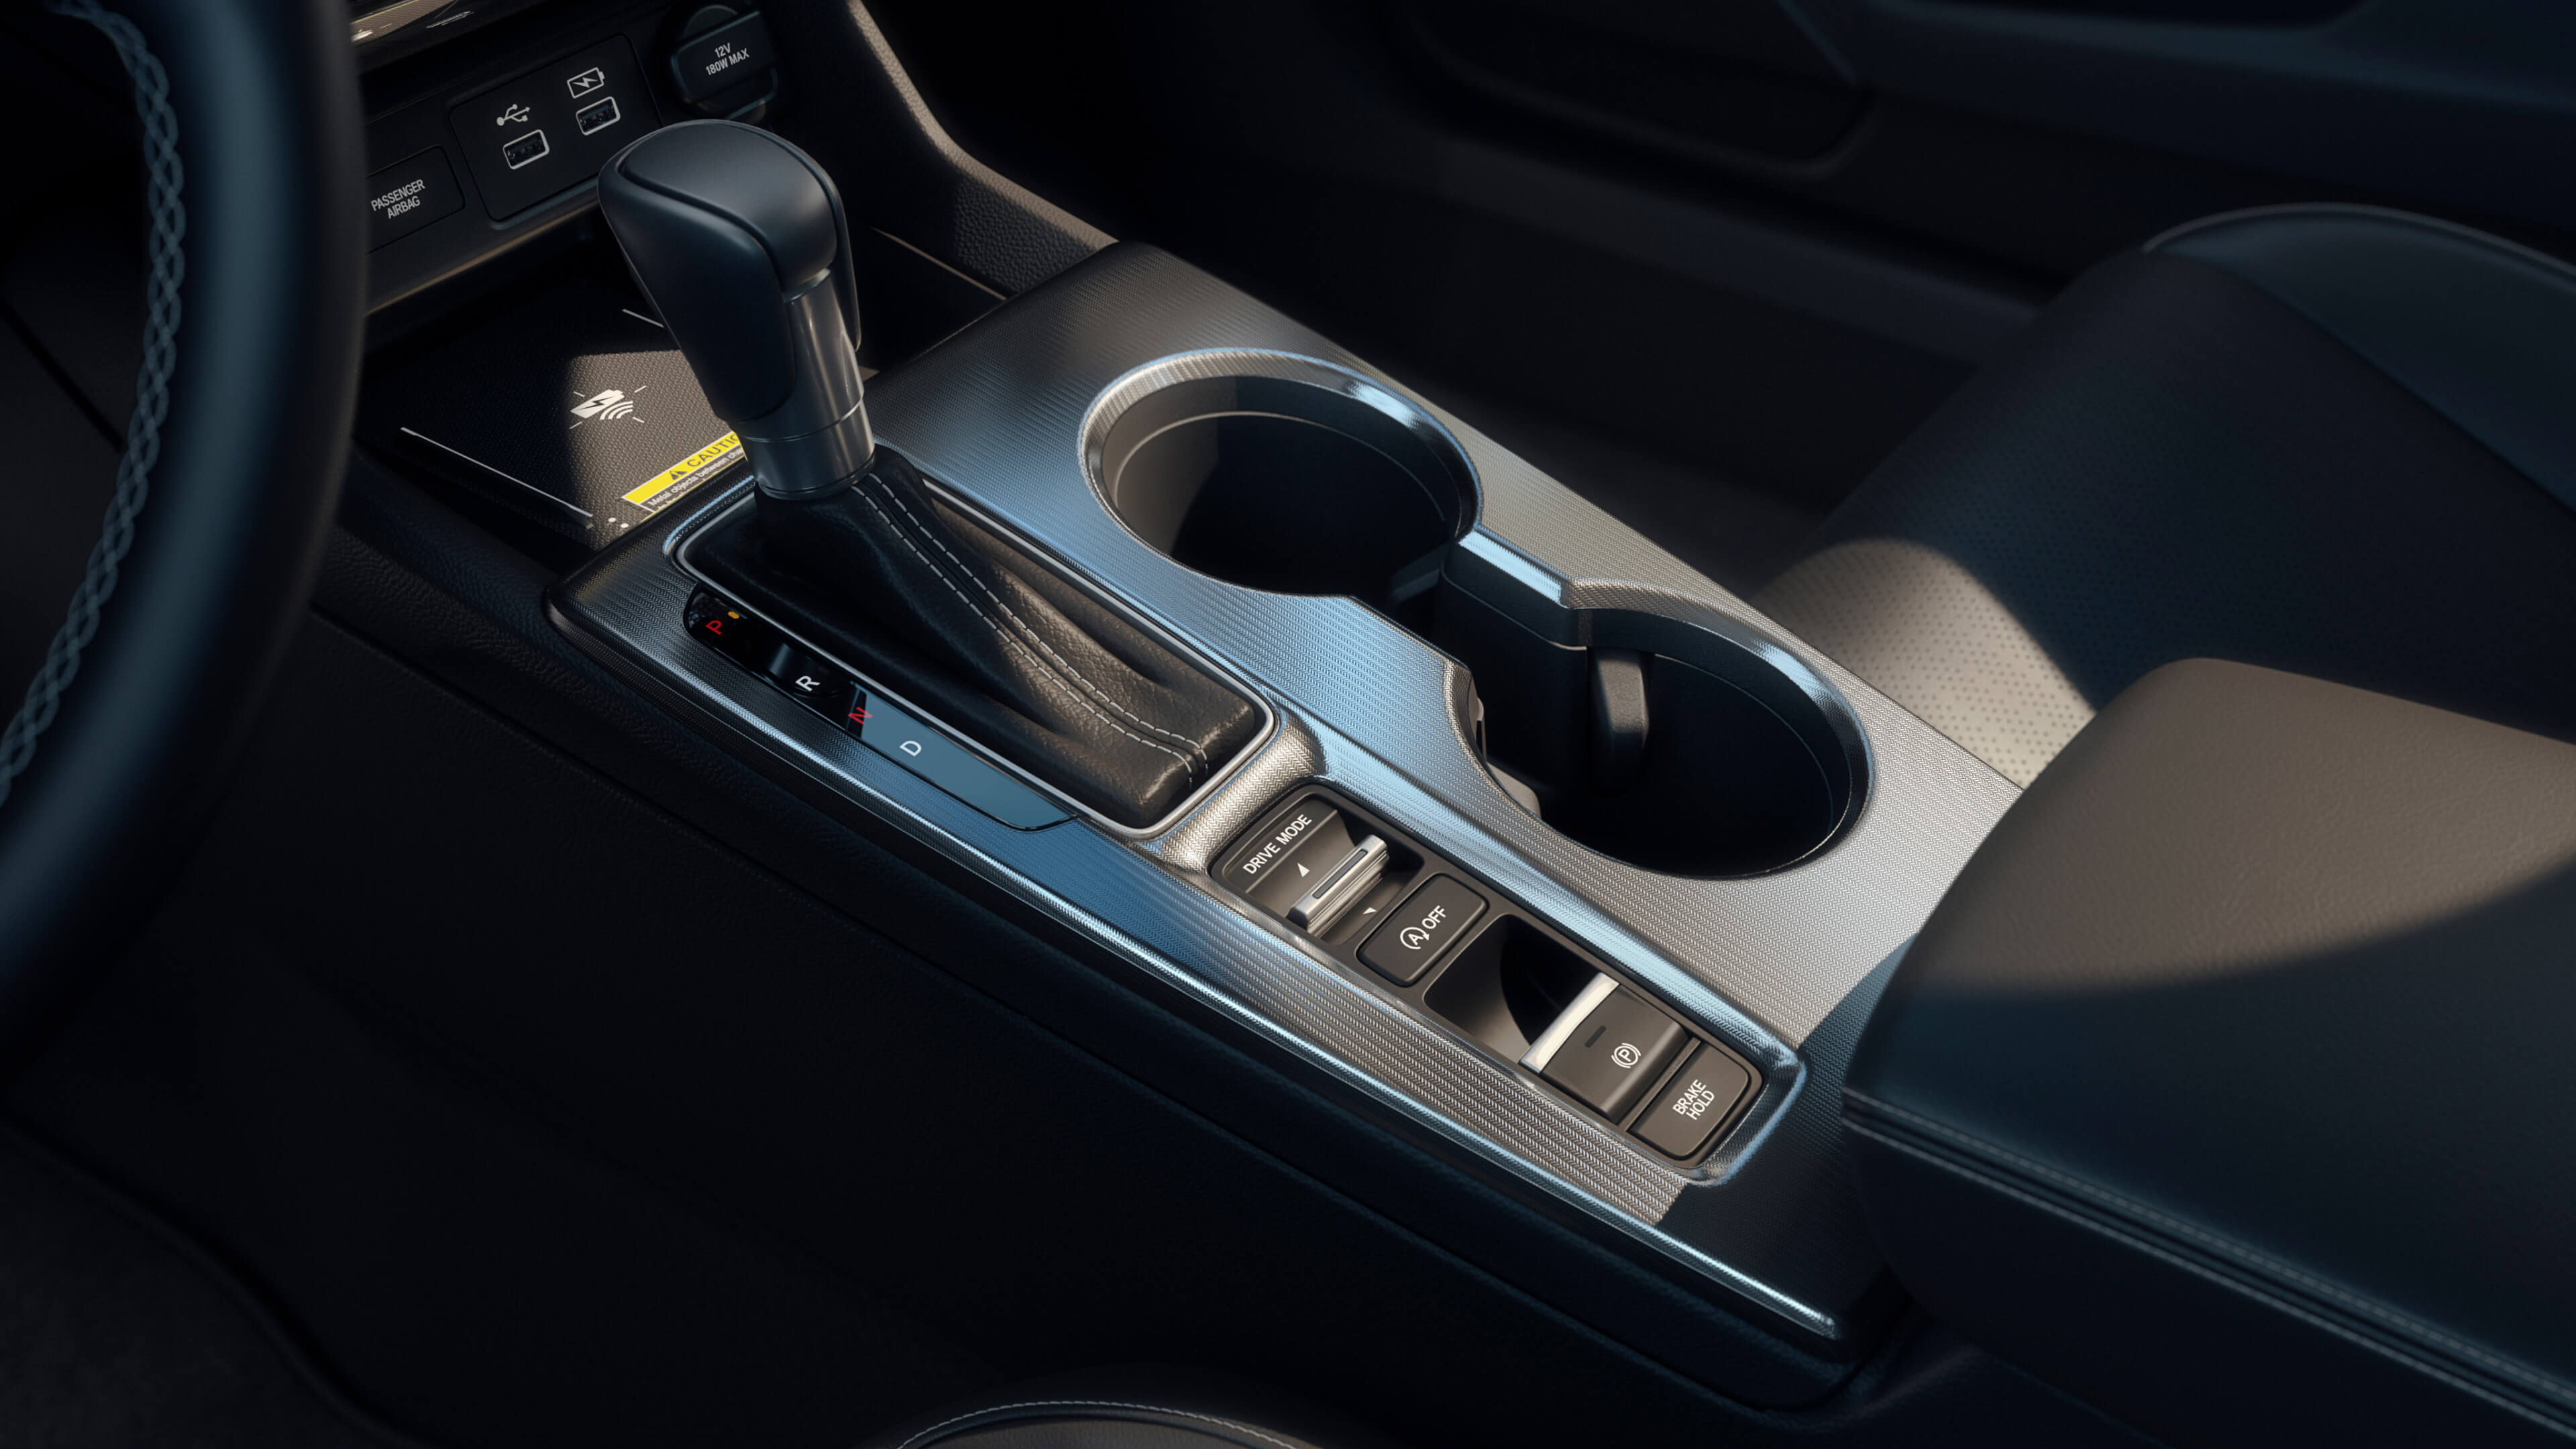 Close-up image of the centre console in a 2022 Honda Civic, including shifter, cup holders, arm rest and front tray.